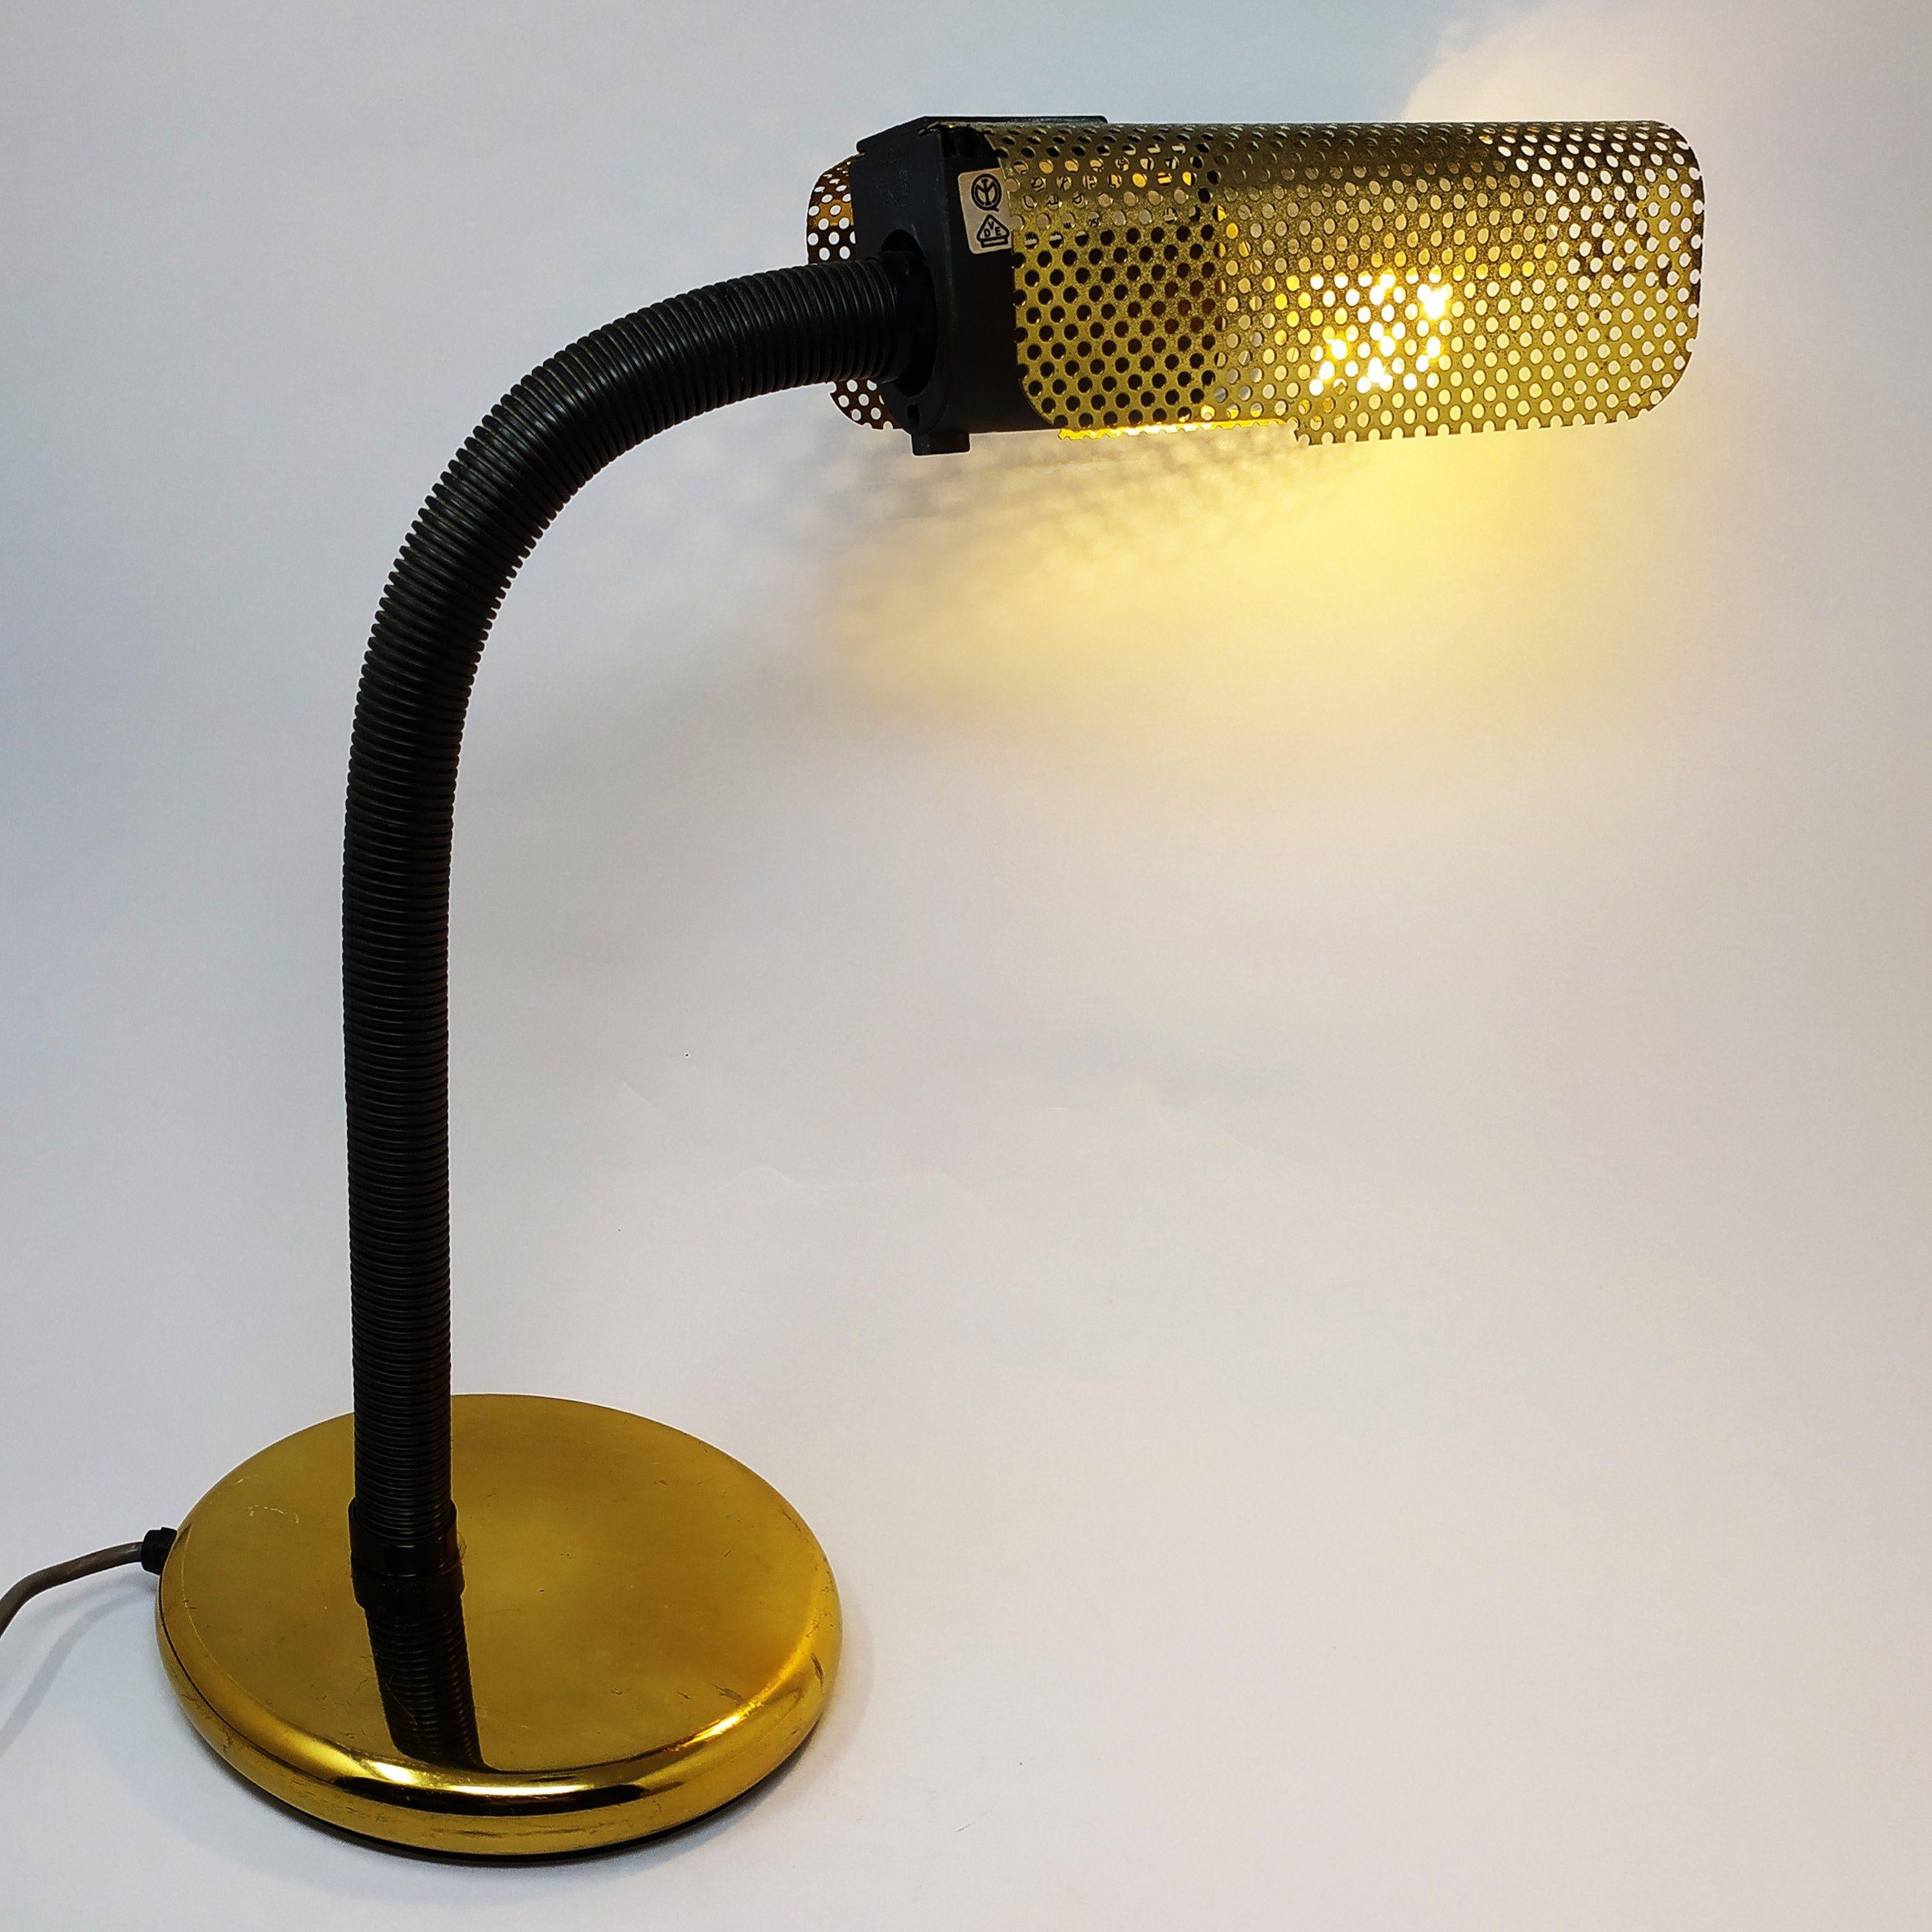 Italian 1970s Stunning Original Vintage Table Lamp design Made in Italy by Targetti For Sale